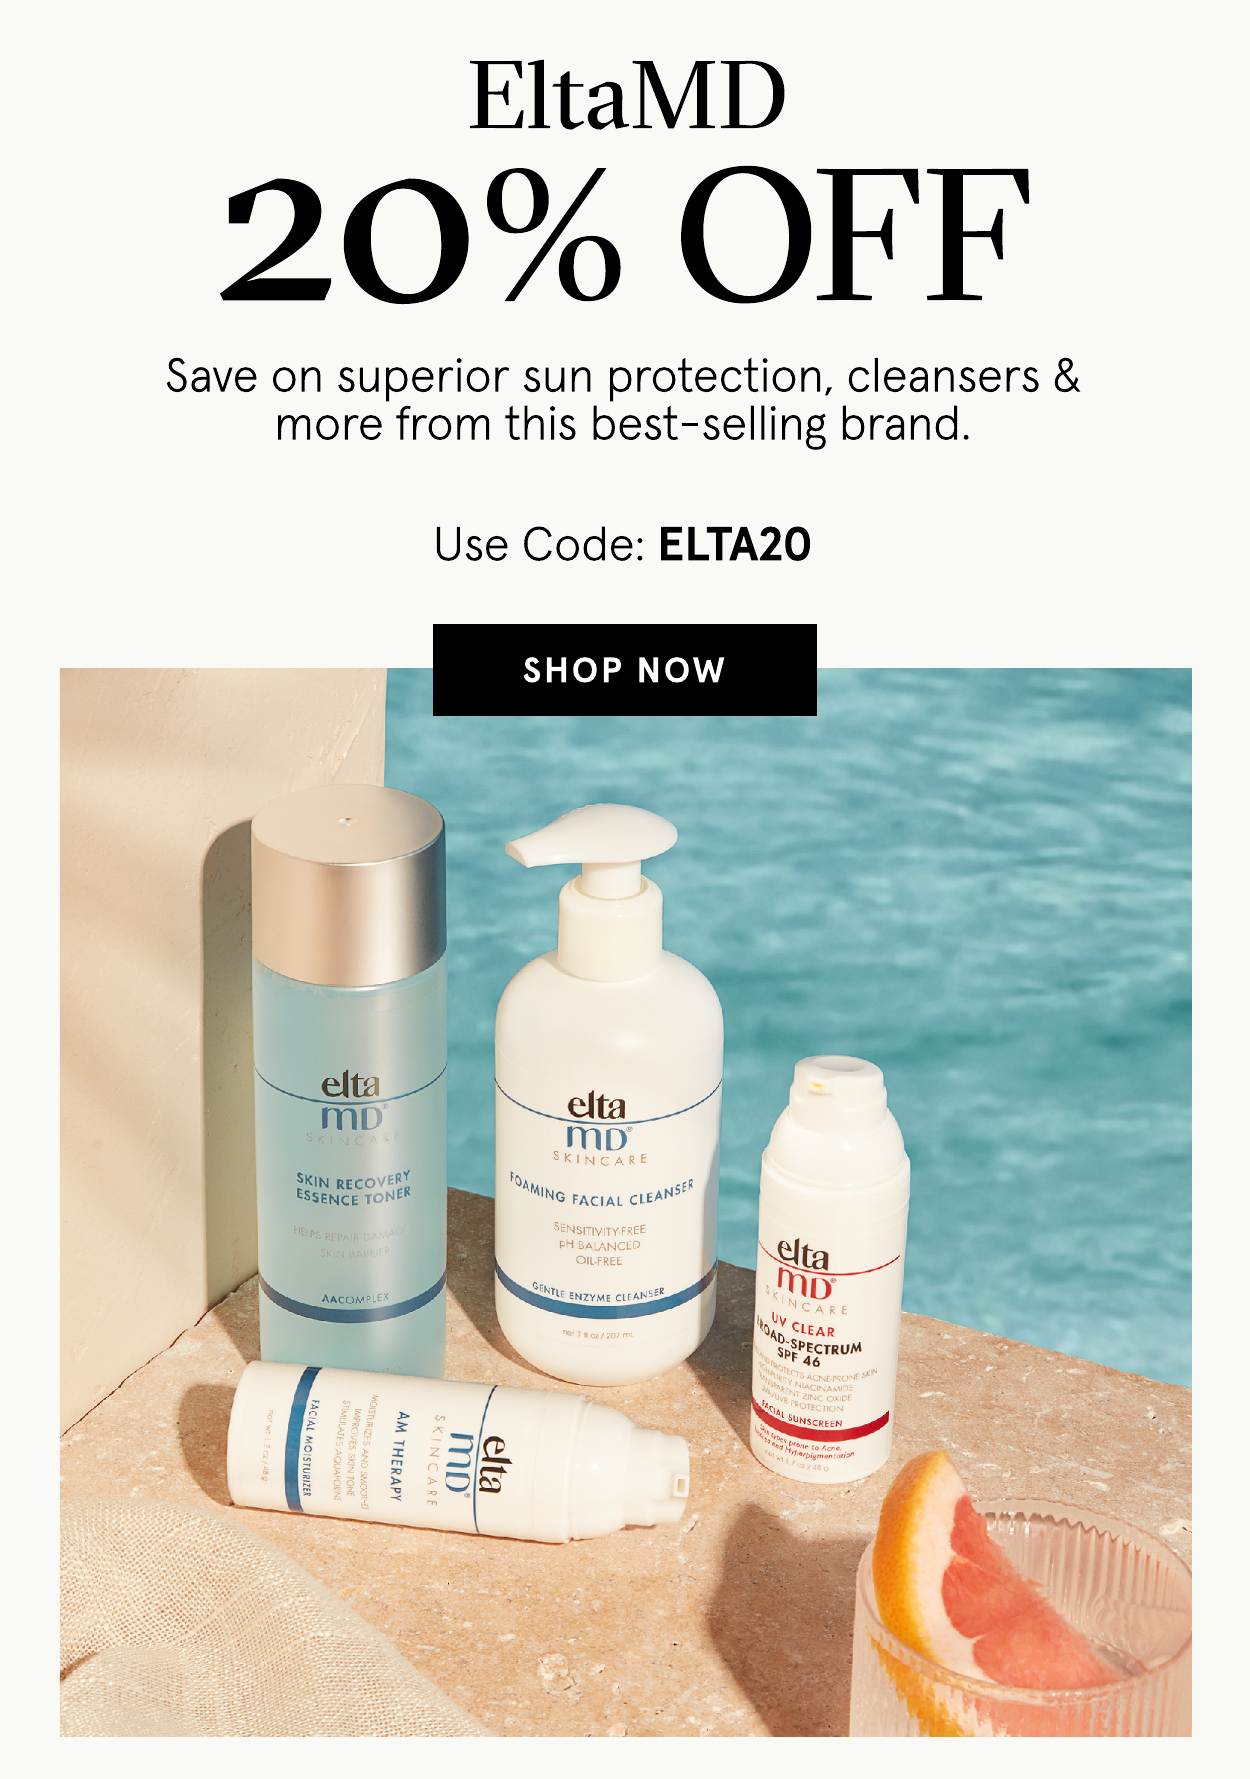 EltaMD 20% OFF Save on superior sun protection, cleansers more from this best-selling brand. Use Code: ELTA20 SHOP NOW mpD SKINCARE fo, Al R MING FaciaL cLEANS 